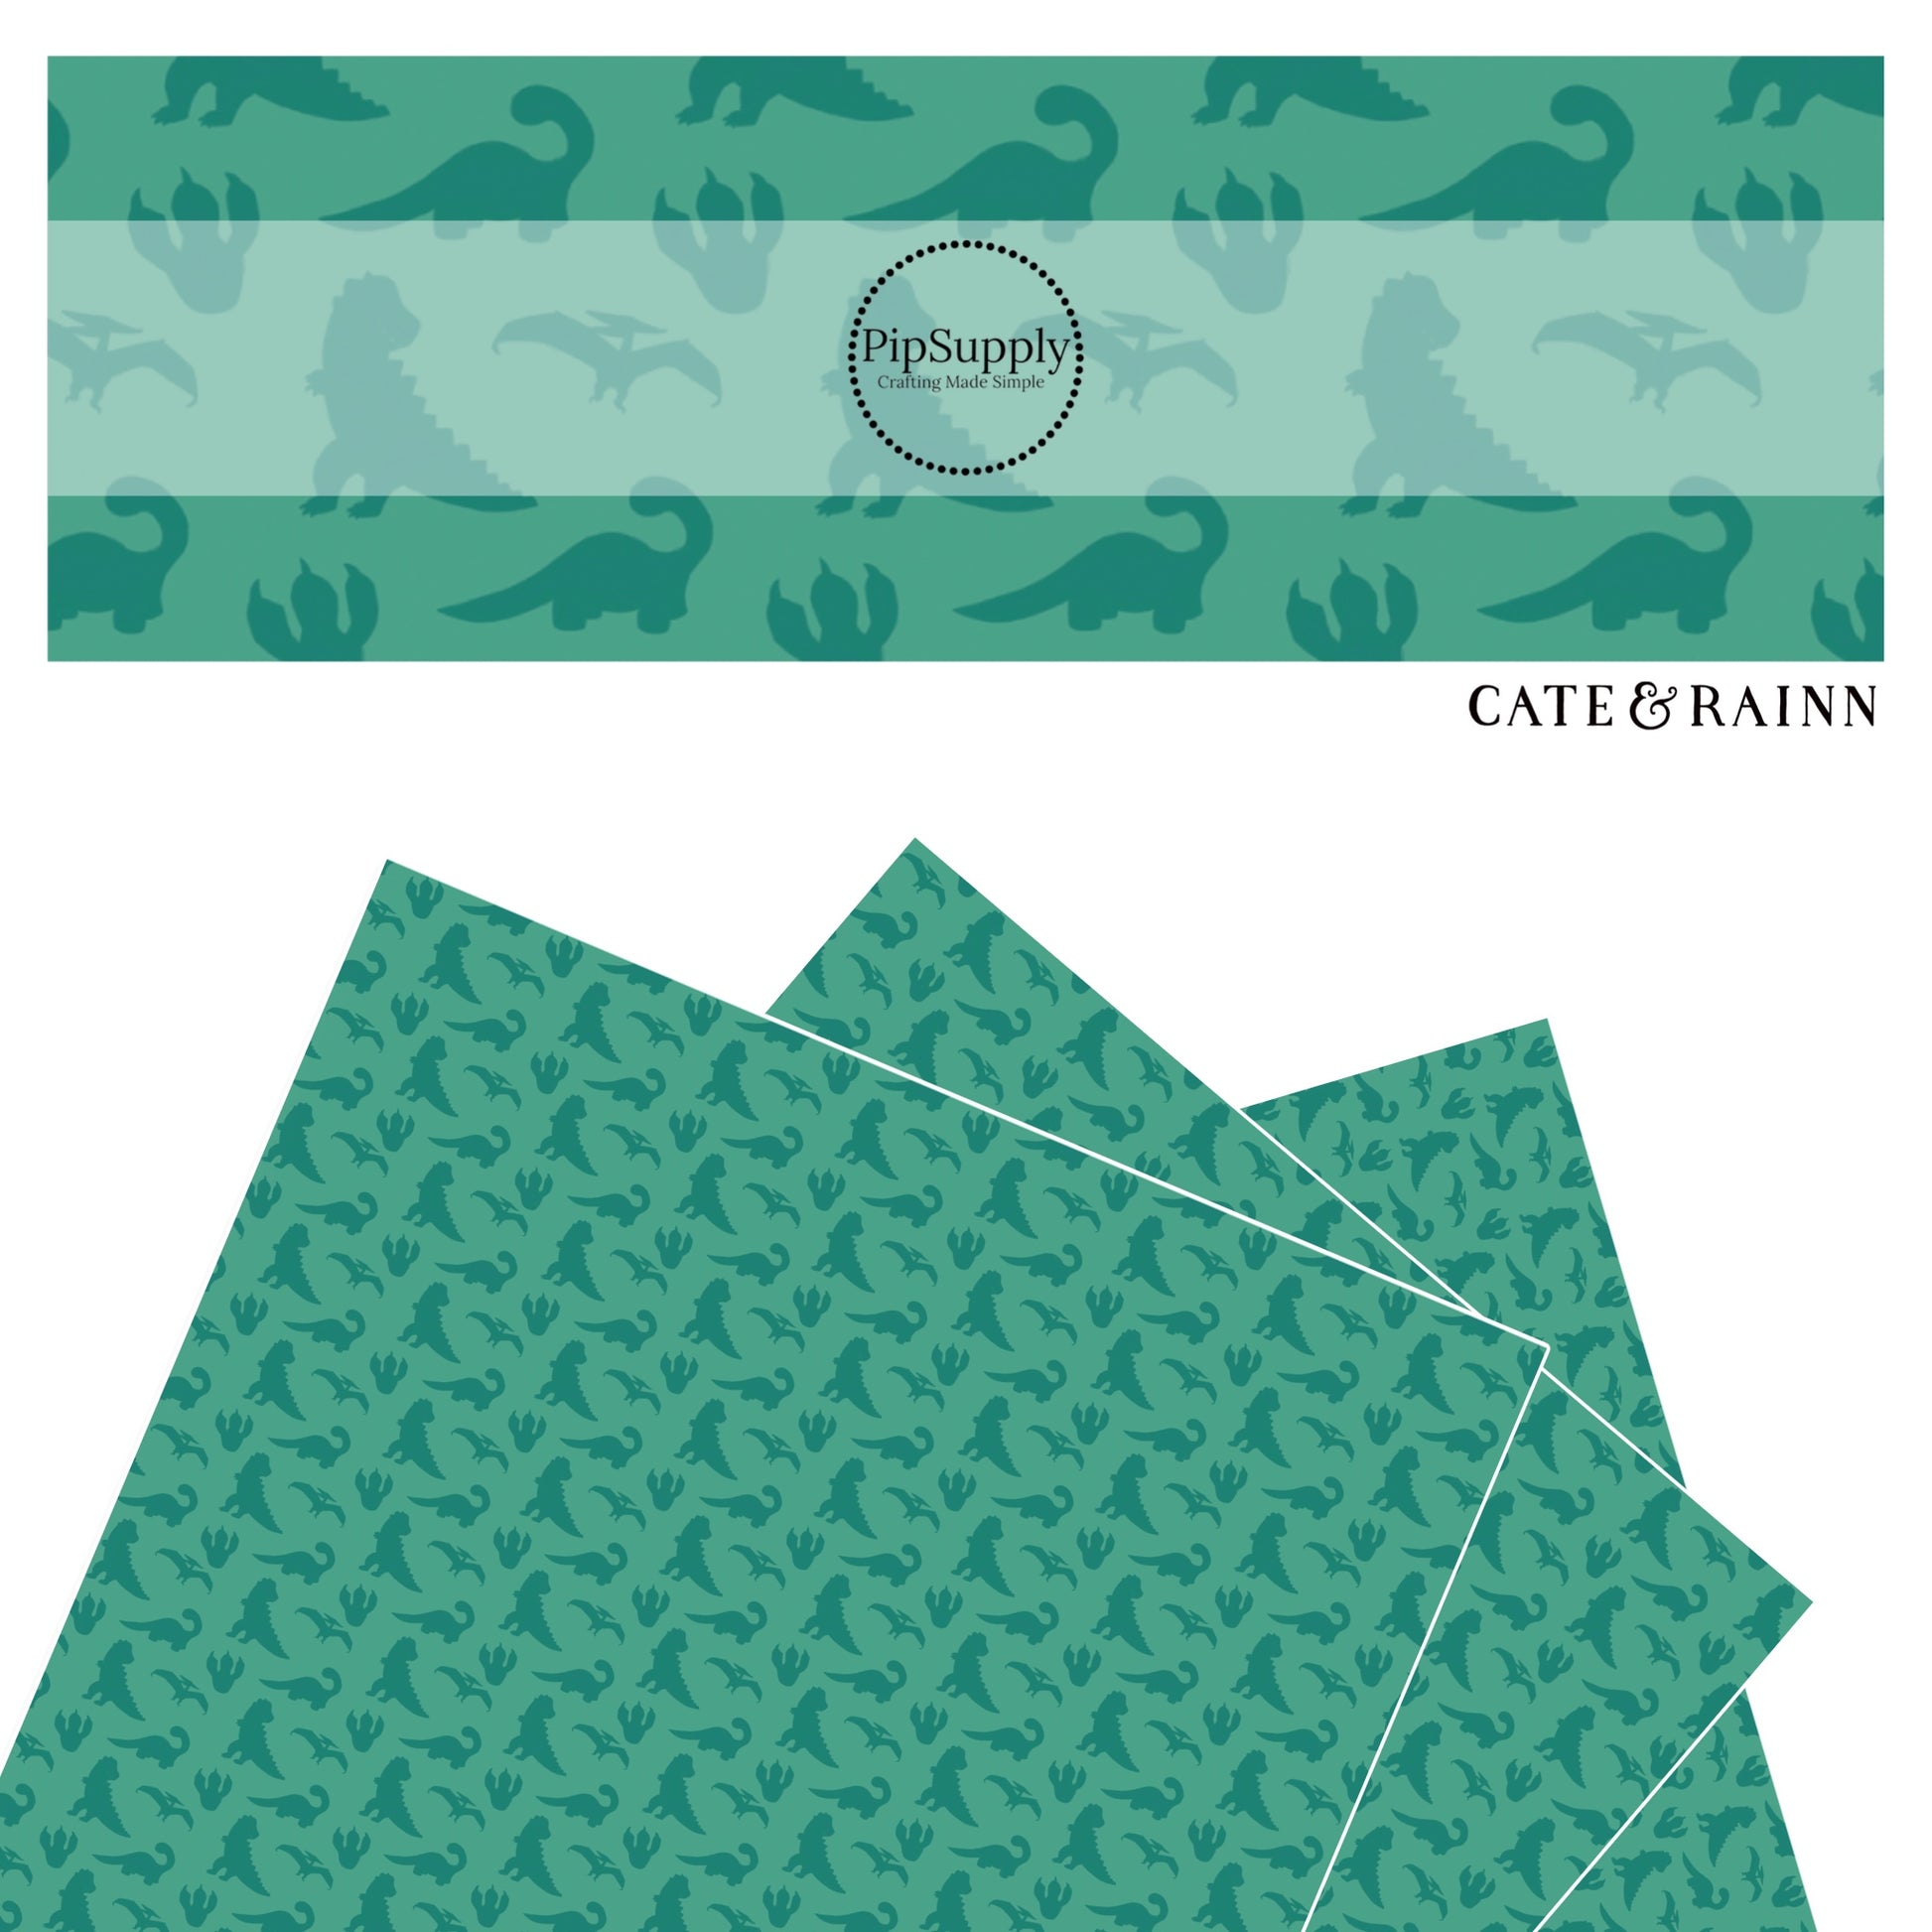 Dino assortment on teal faux leather sheet.